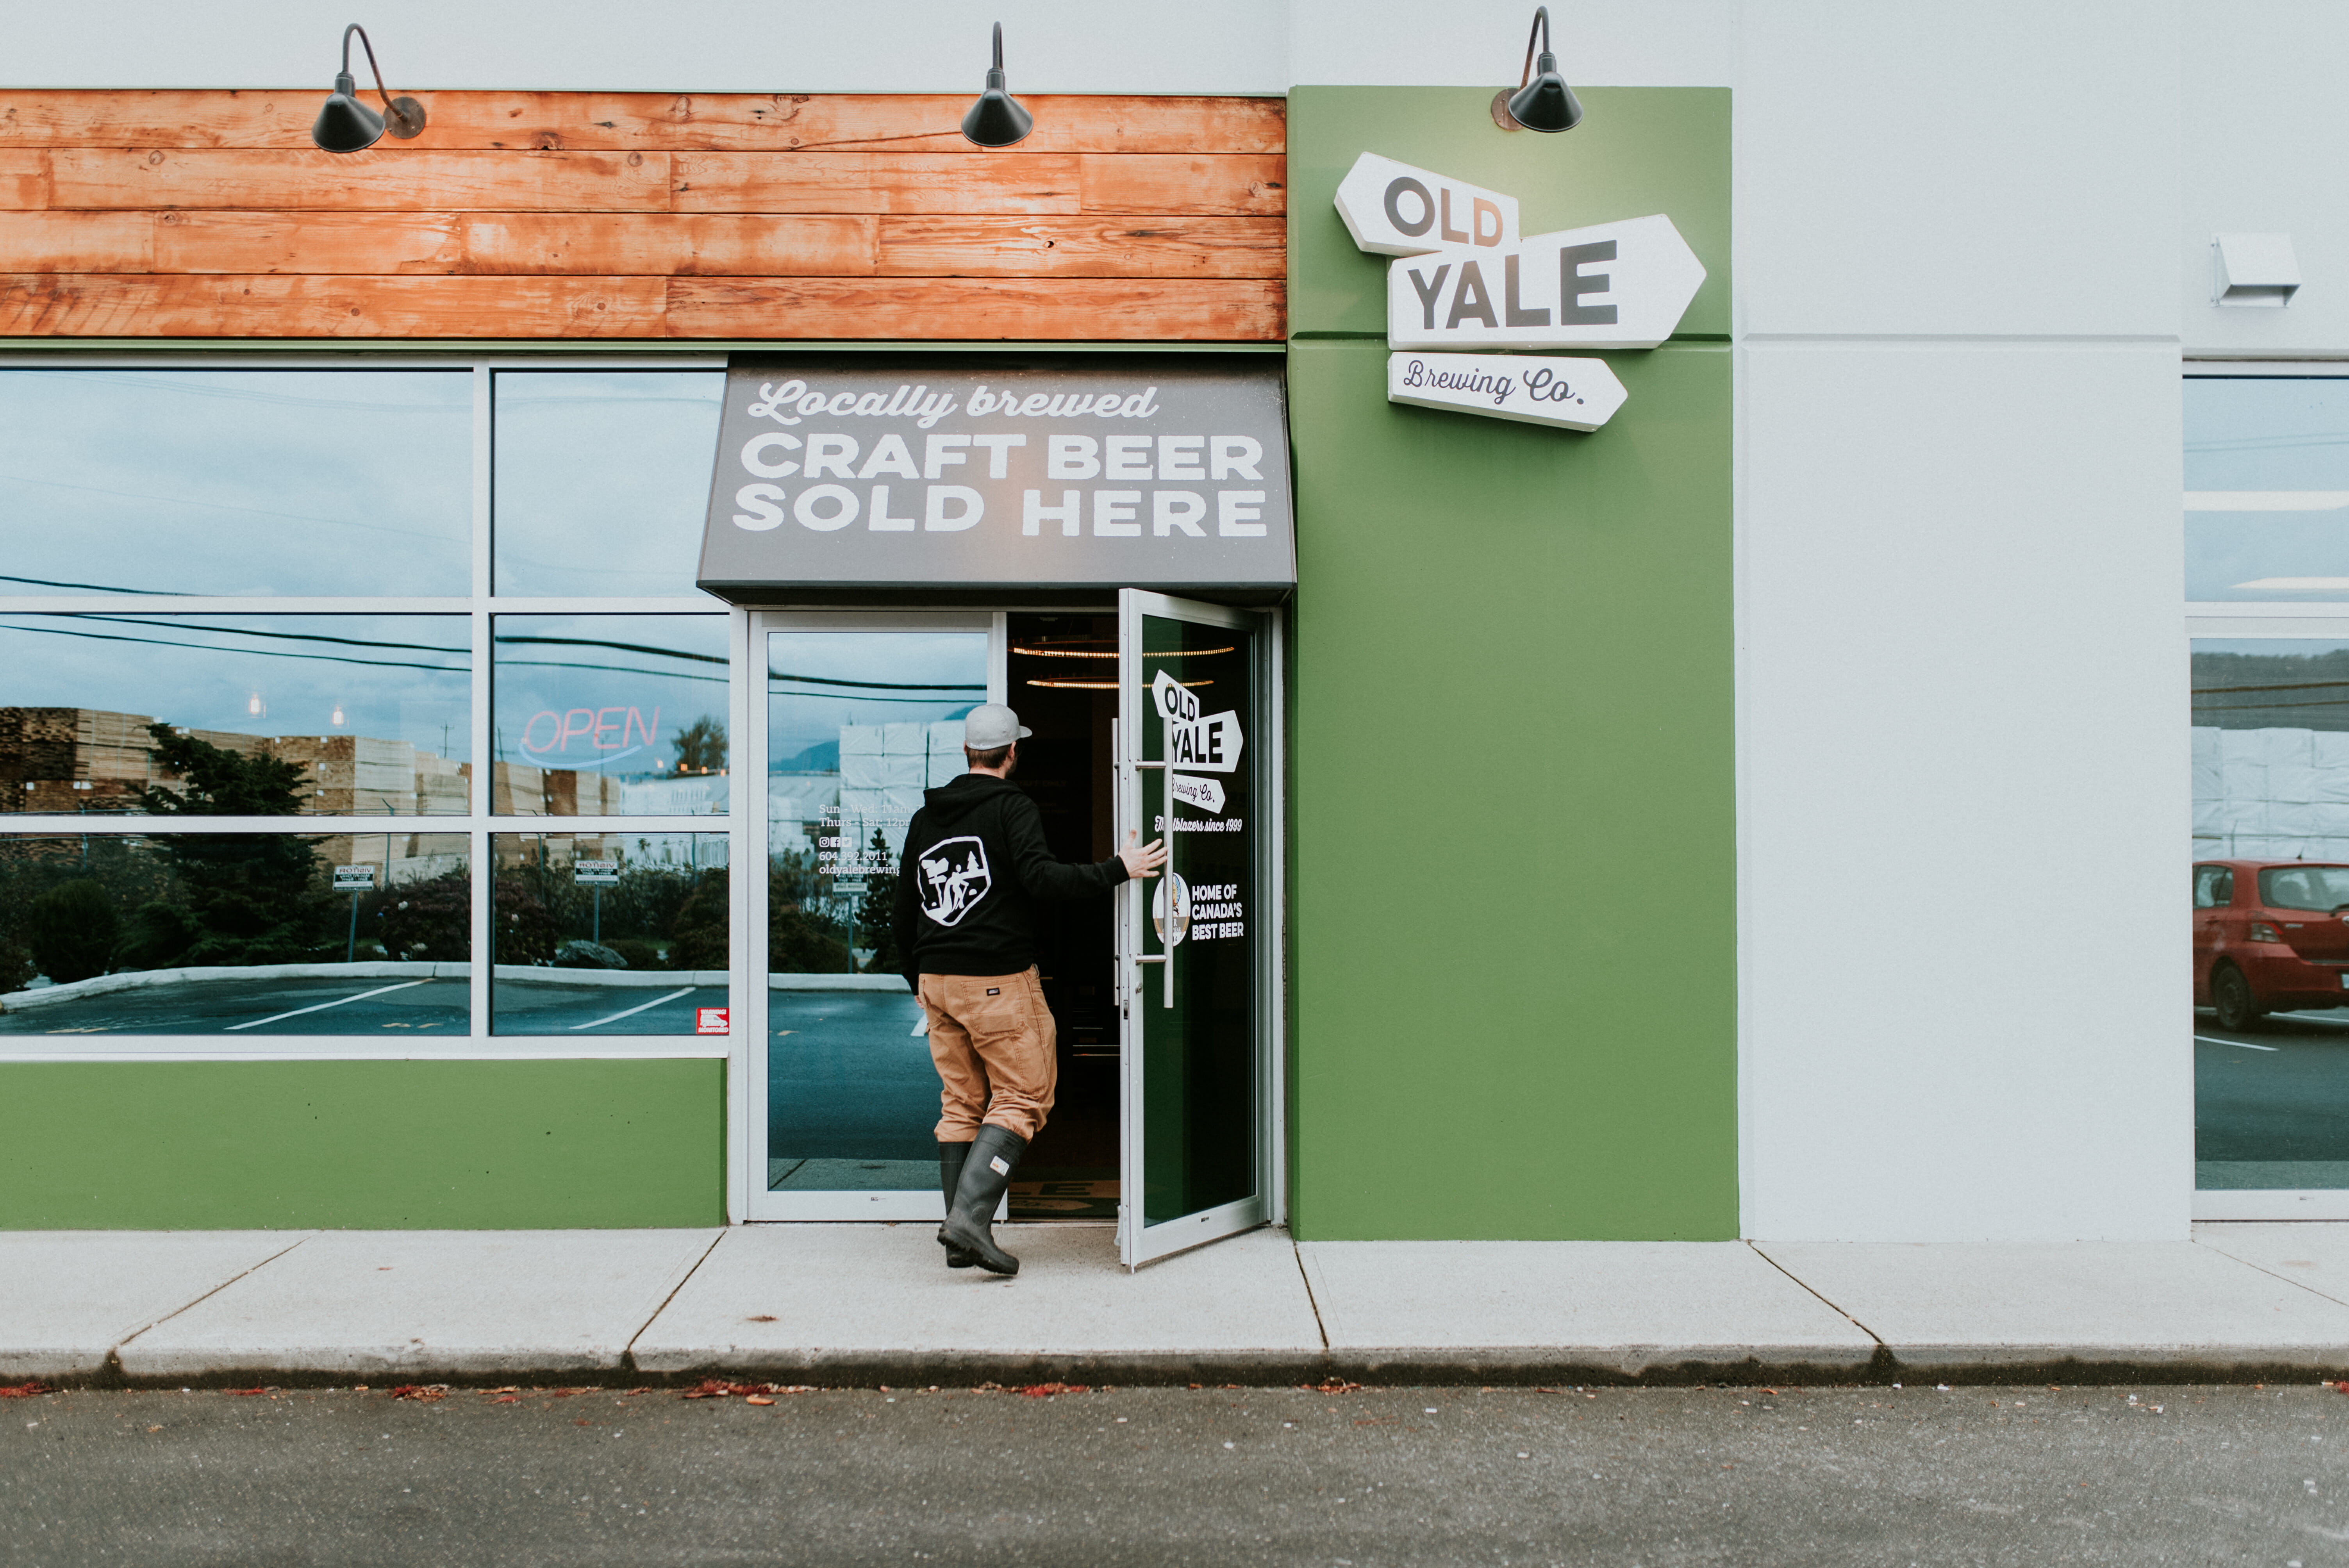 Old Yale Brewing Co in Chilliwack, BC